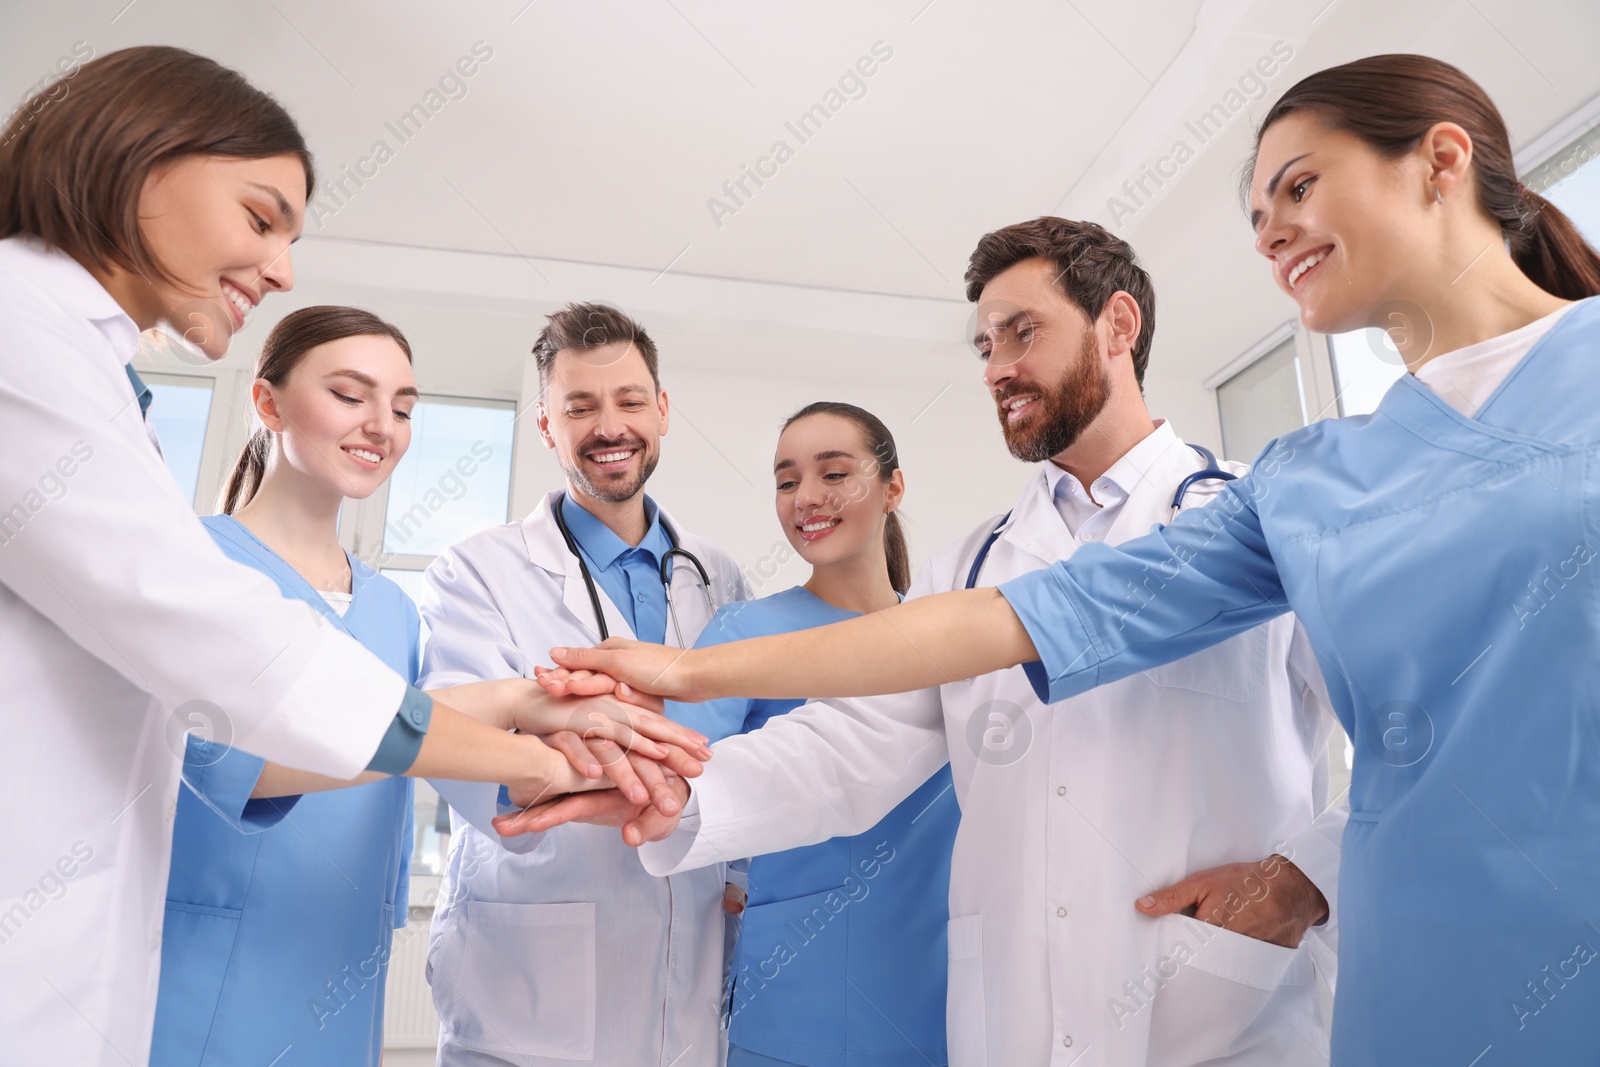 Photo of Team of medical doctors putting hands together indoors